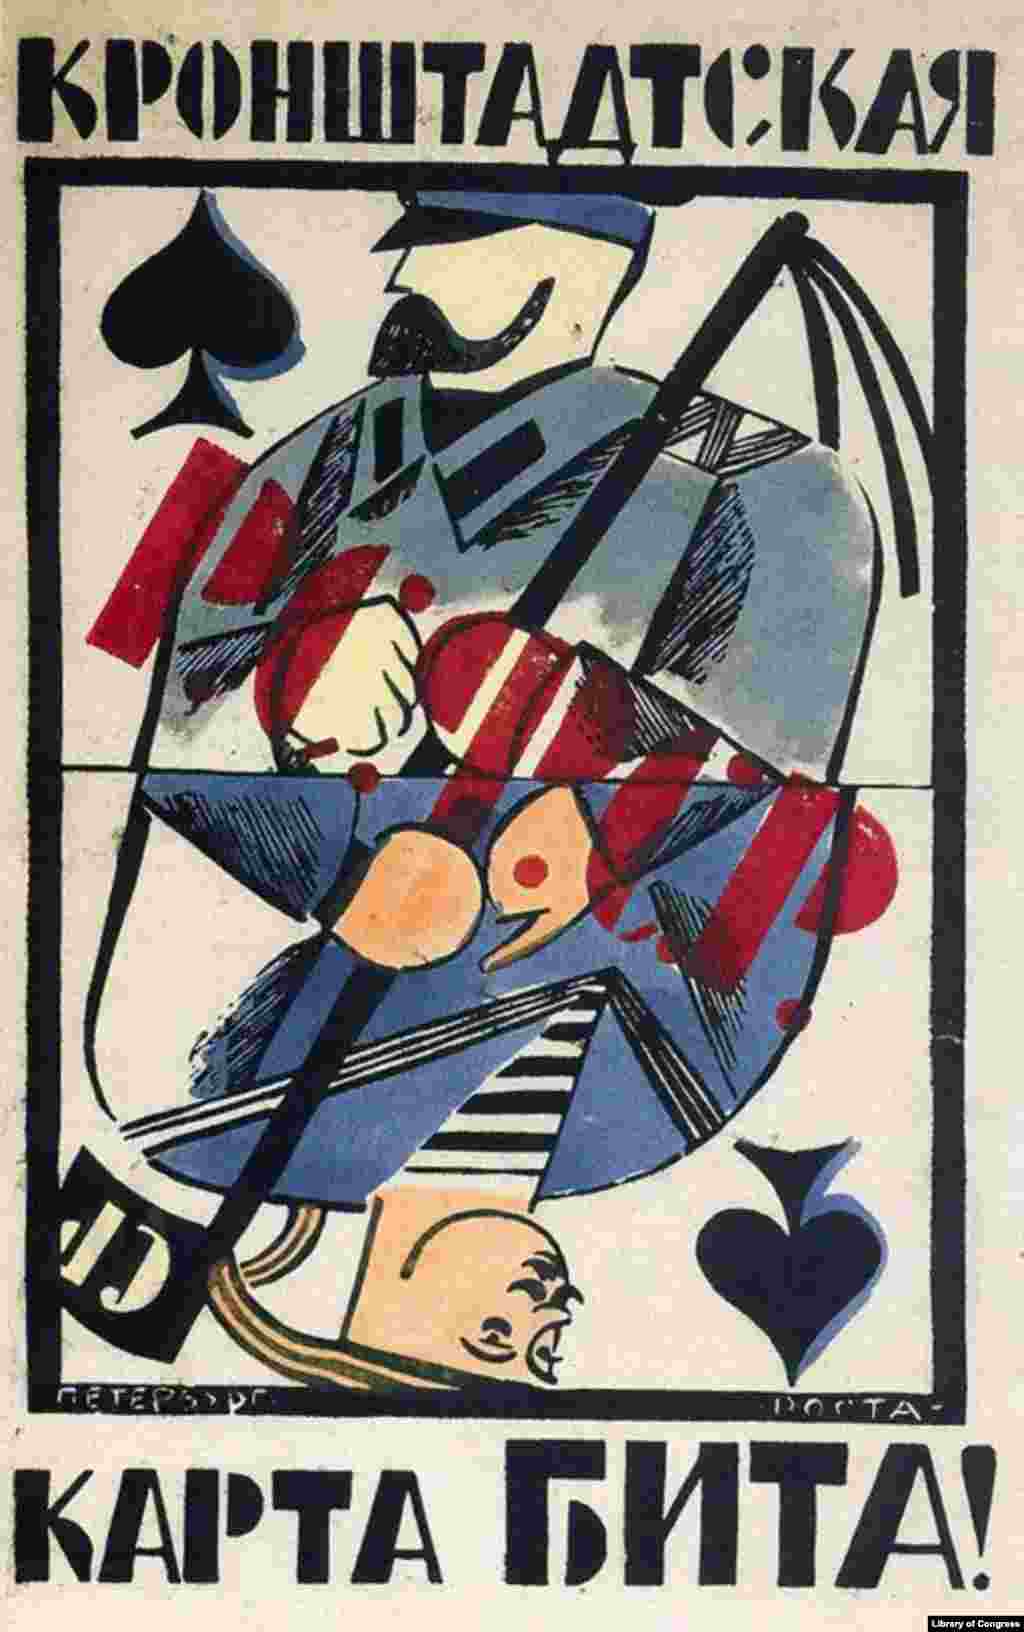 That playing card placard may be inspired by this famous poster from the early days of communist rule in Russia referencing a sailor&rsquo;s rebellion in Kronstadt, near St. Petersburg. The Kronstadt rebellion was an uprising against Lenin&rsquo;s Bolsheviks. The uprising was brutally put down by the Red Army and more than 1,000 sailors were executed. The poster suggests duplicity by the sailors, declaring: &ldquo;The Kronstadt card is beaten.&rdquo;